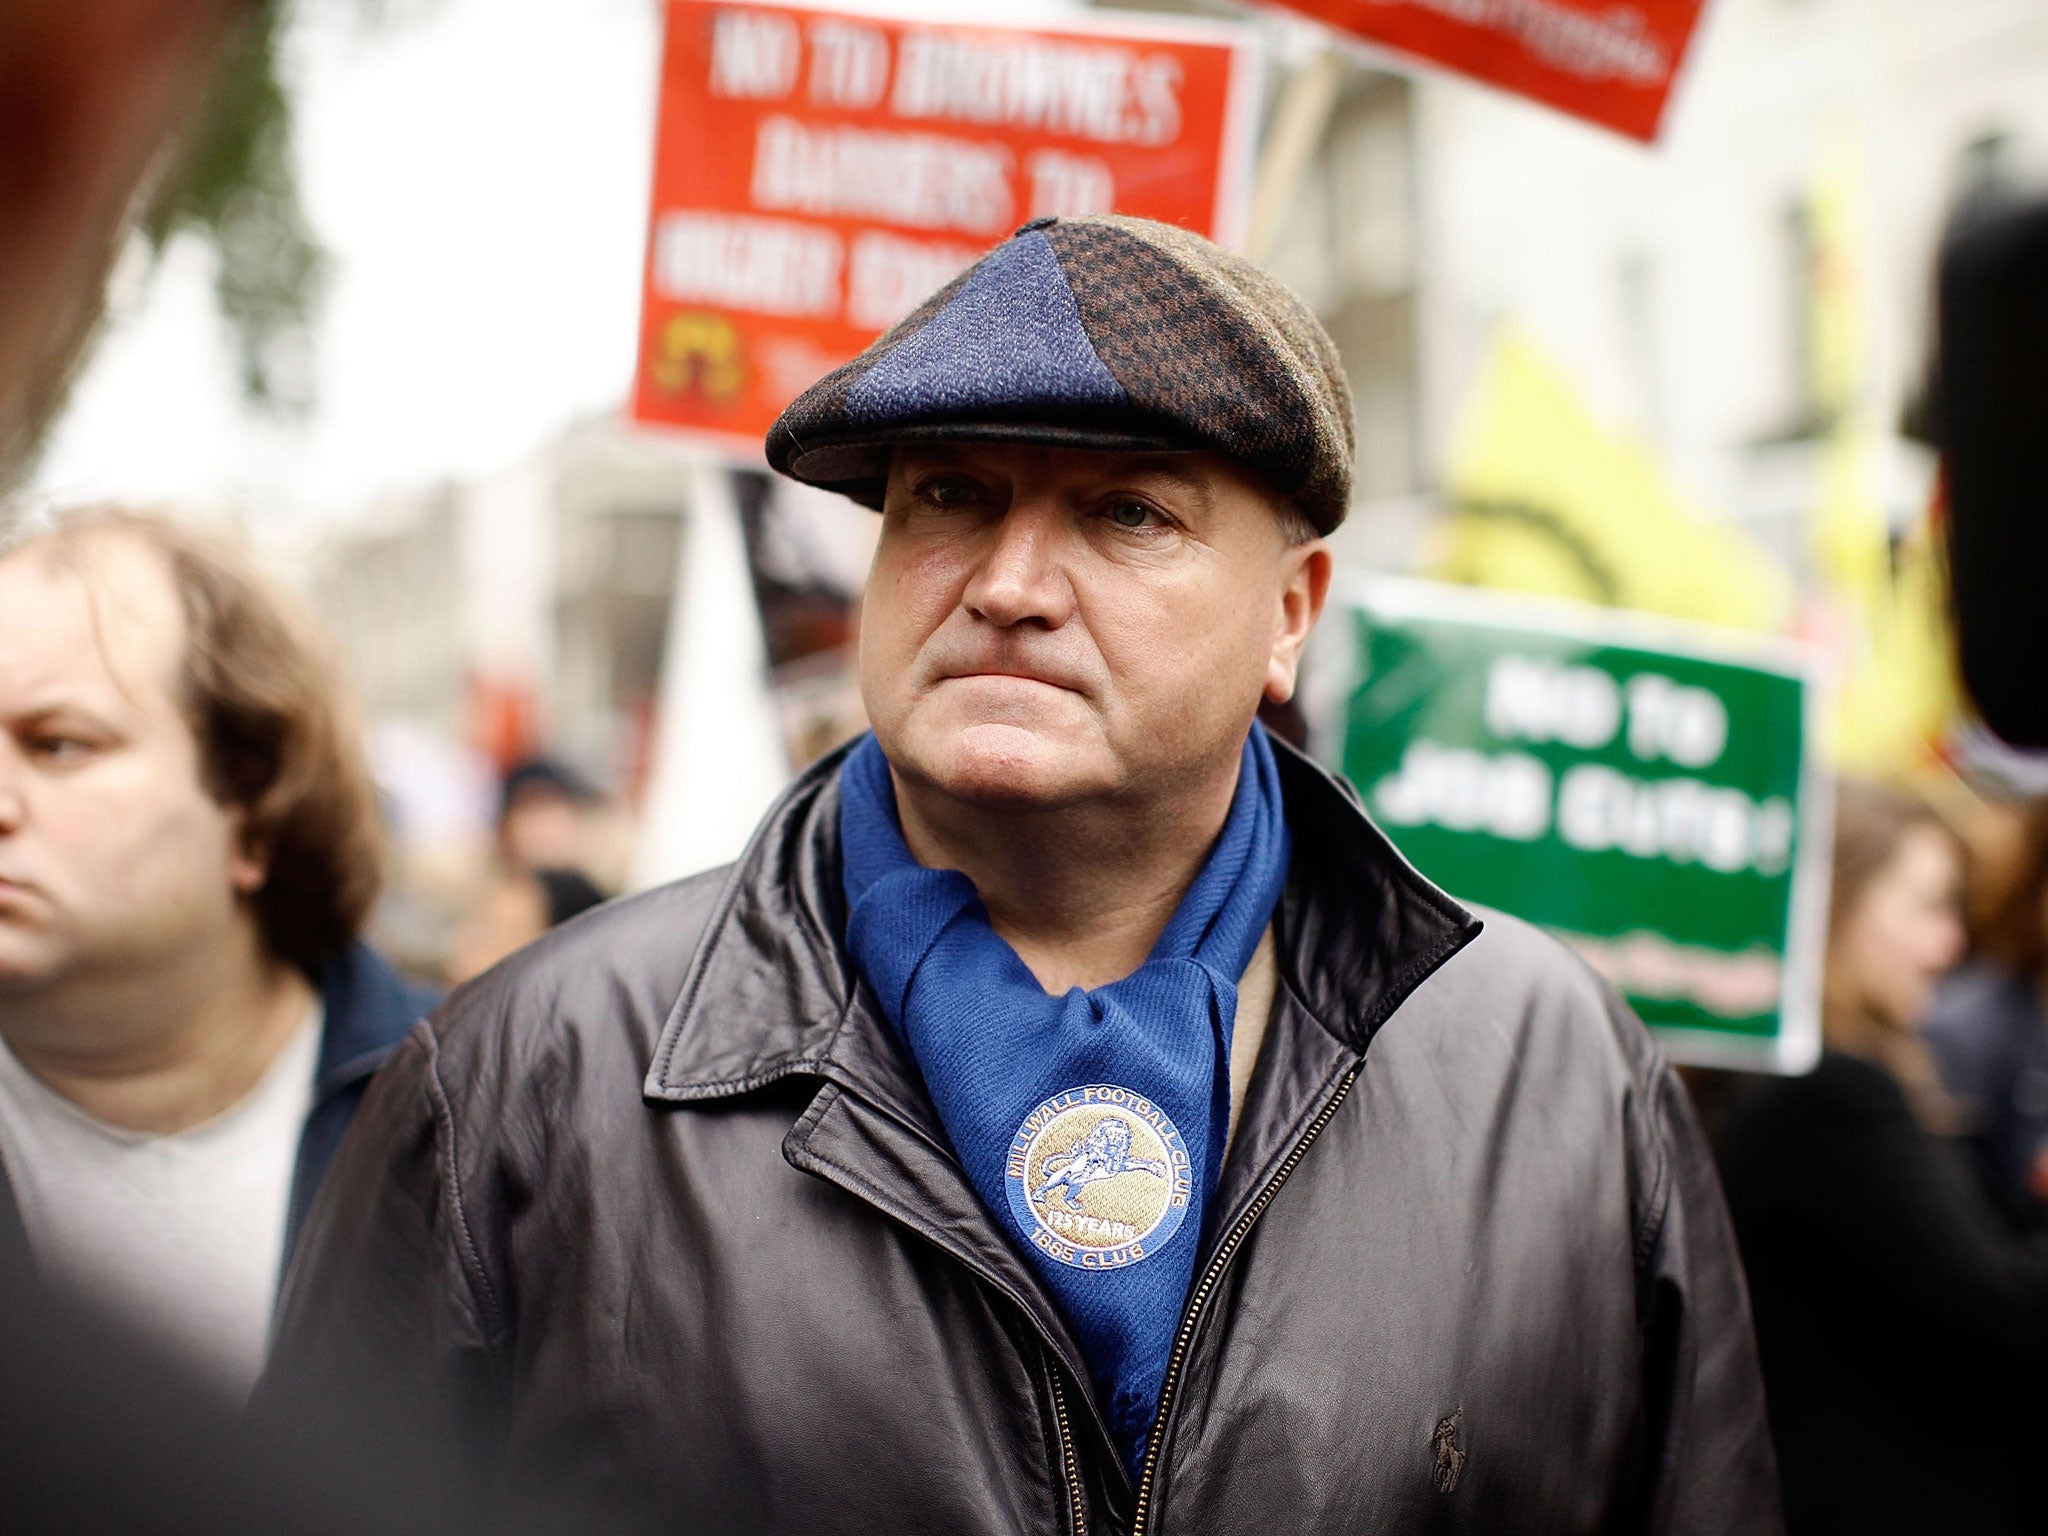 Bob Crow, General Secretary of the RMT union, attends with other activists and demonstrators a rally at Bedford Square to protest against government spending cuts in central London 